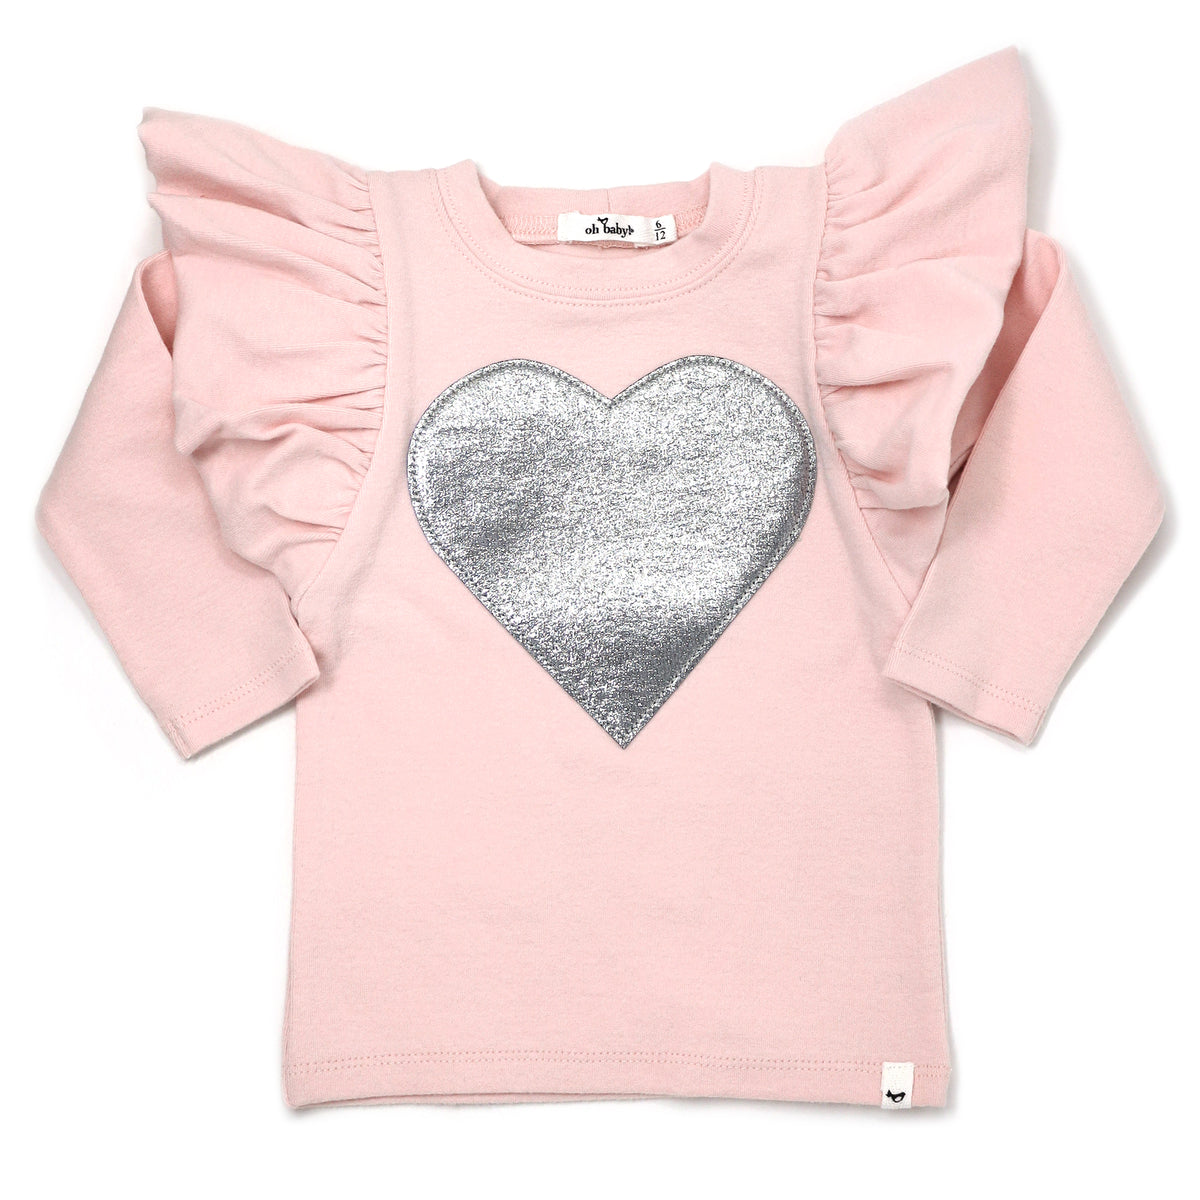 oh baby! Silver Heart Butterfly Sleeve Tee - Pale Pink